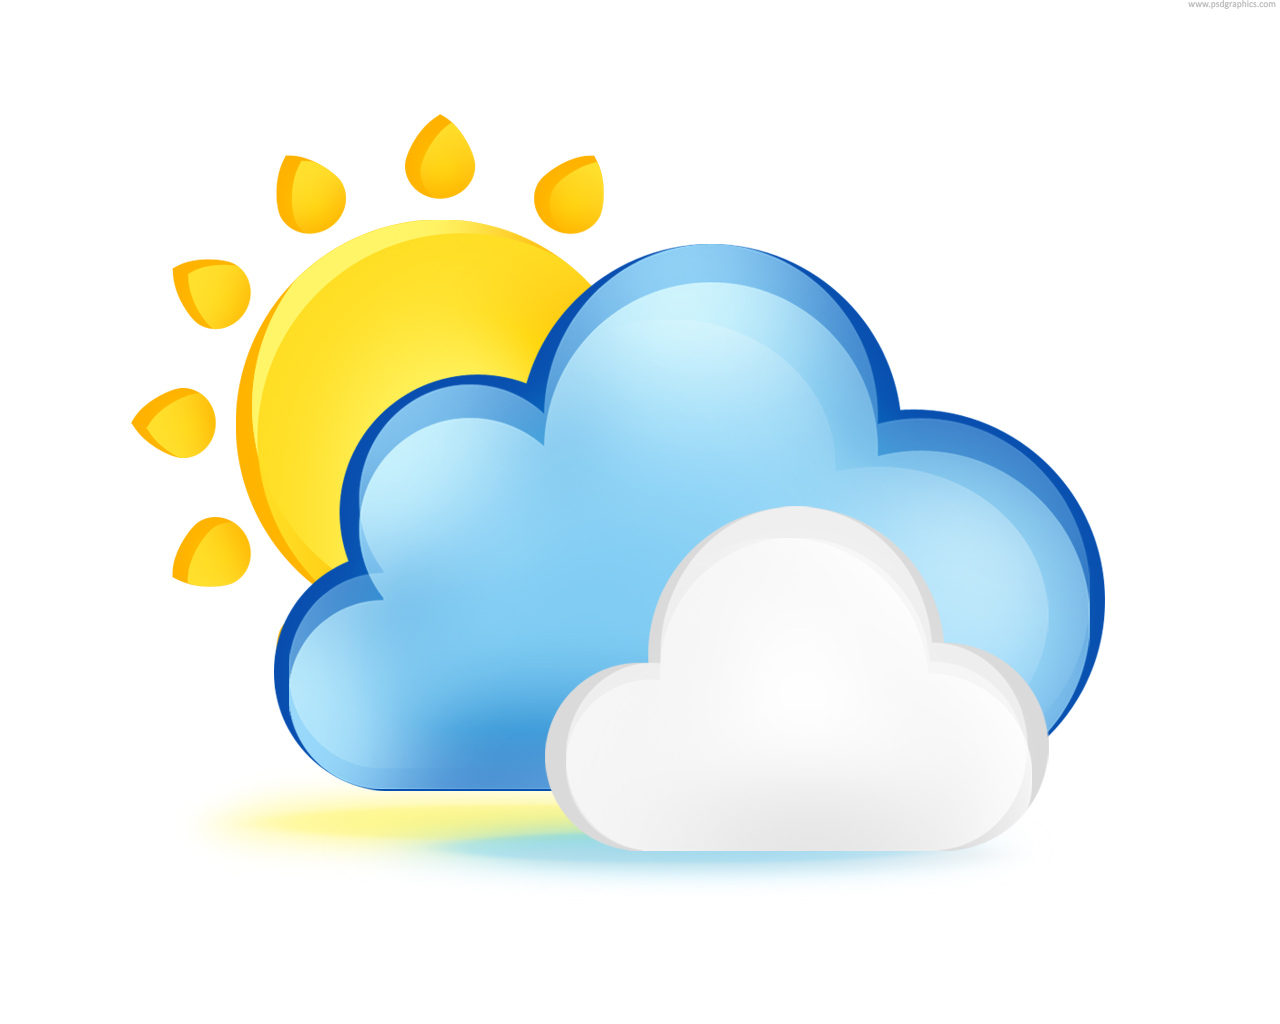 10 Weather Forecast Icons Images - Weather Icons, Weather Icons and